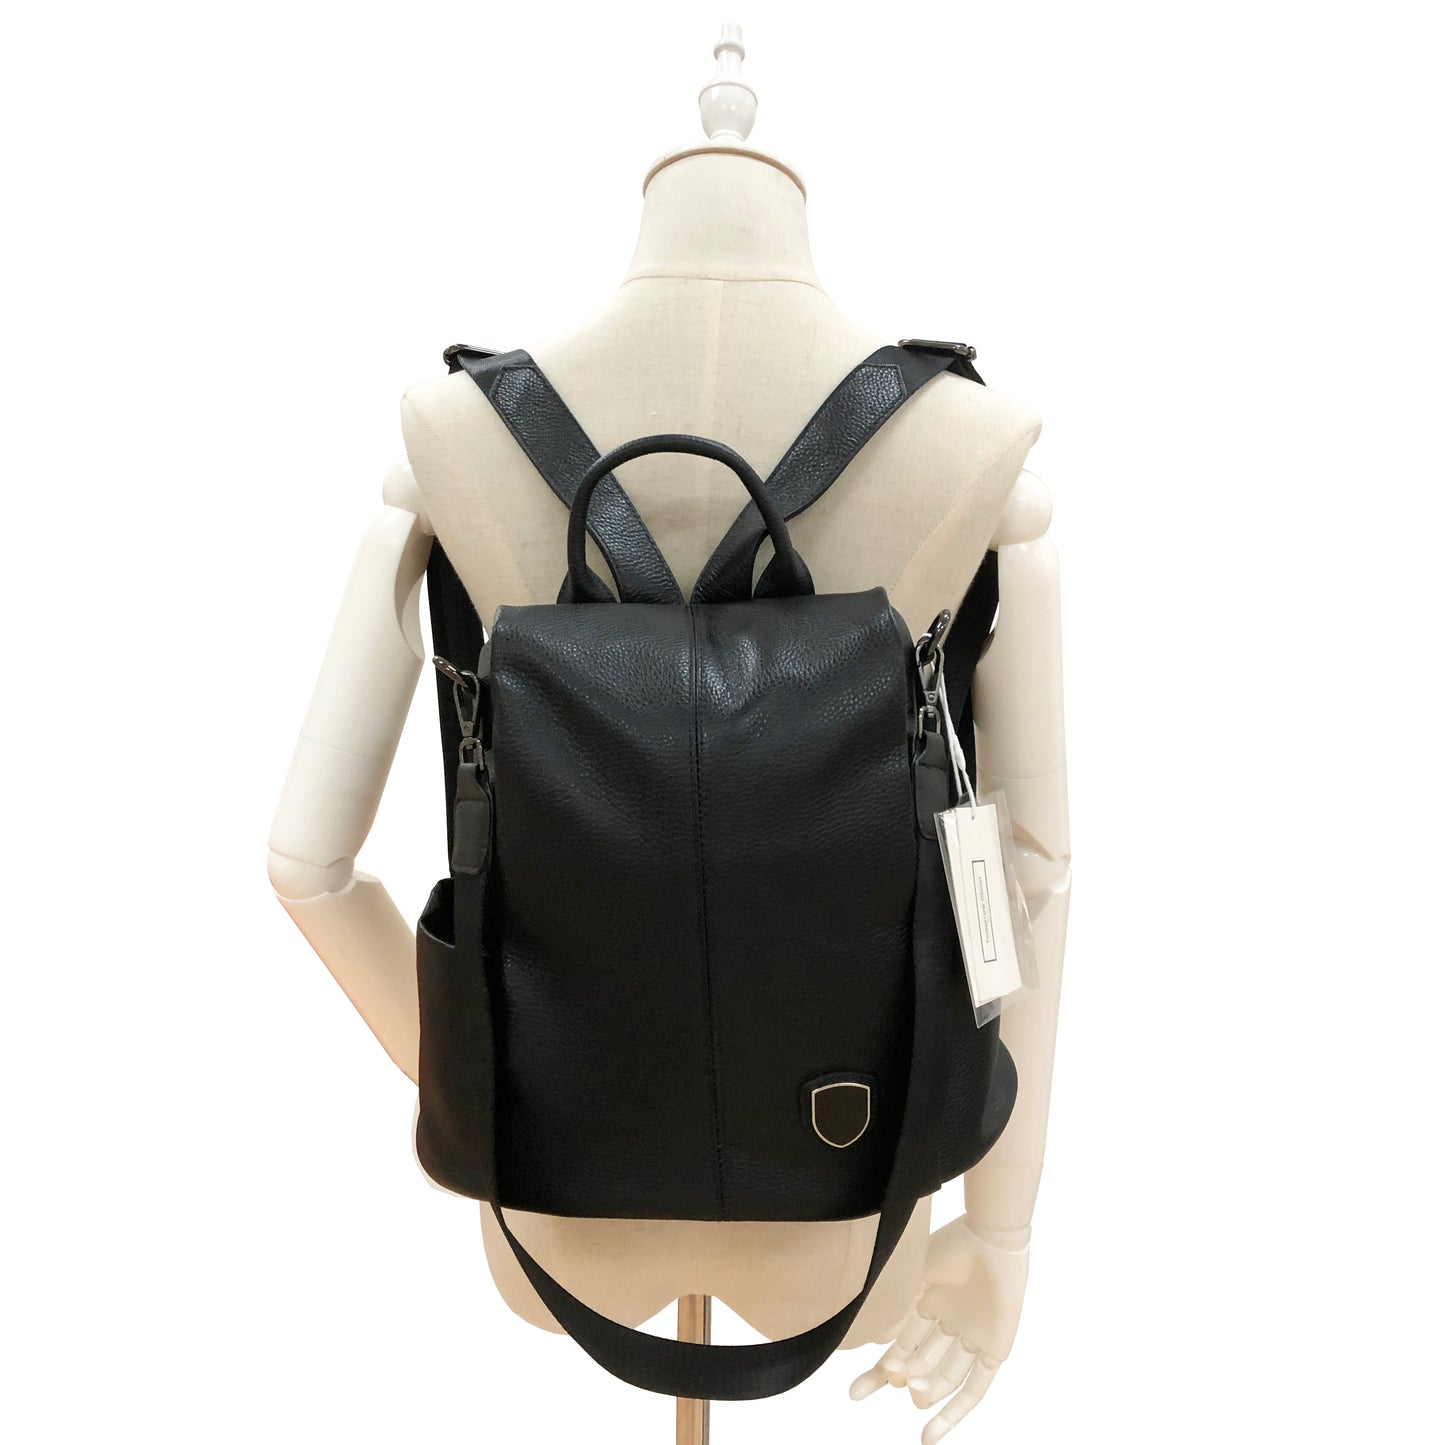 Women's and Men's unisex cowhide leather Flap design anti theft backpack by Tomorrow Closet